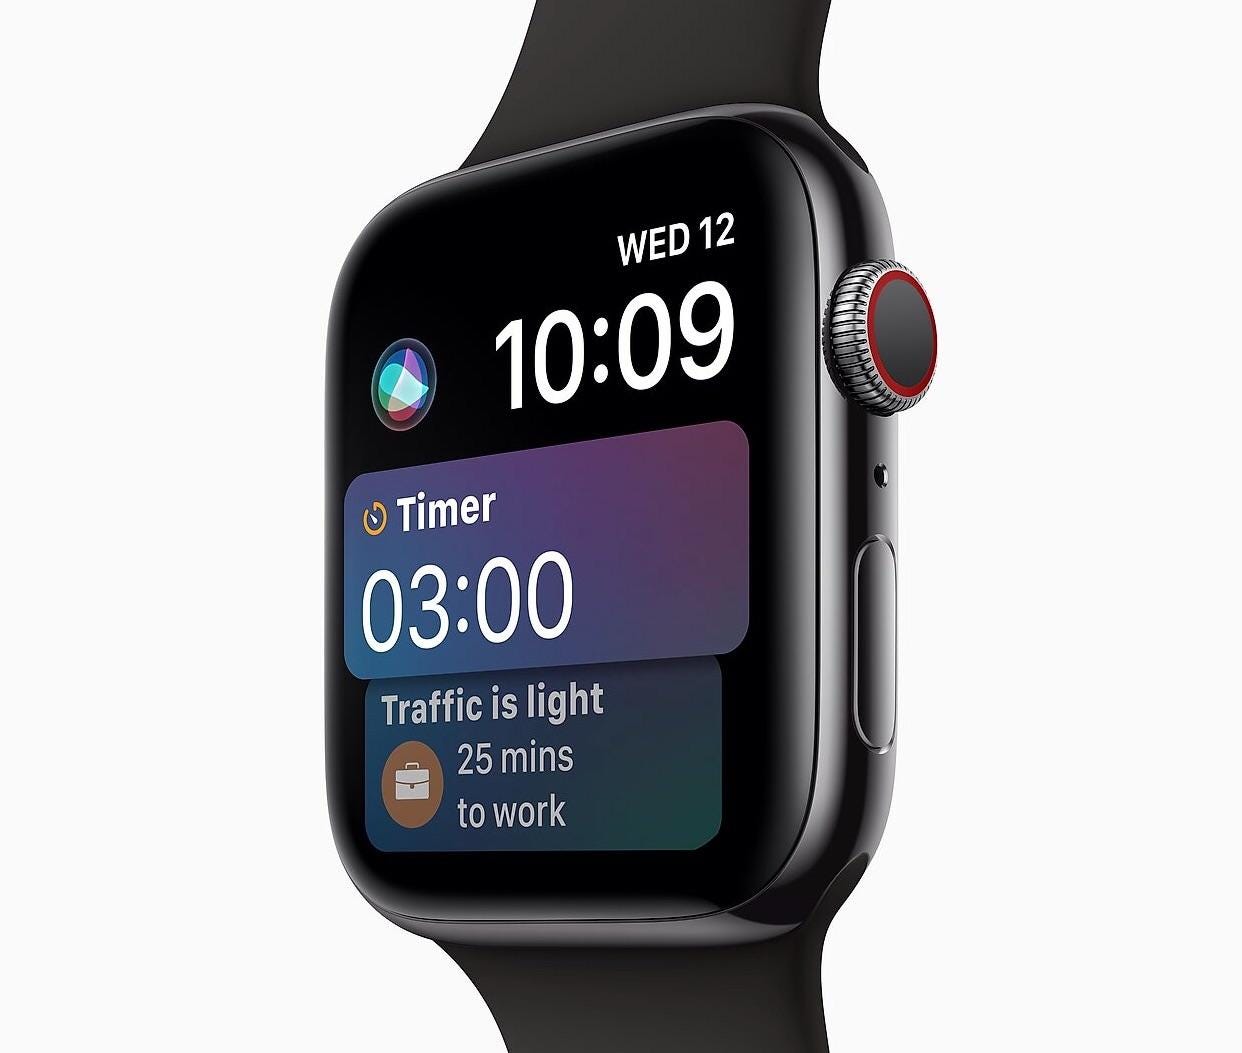 Thoughts on the Siri Watch Face in 2021 | by Hobie Henning | Medium